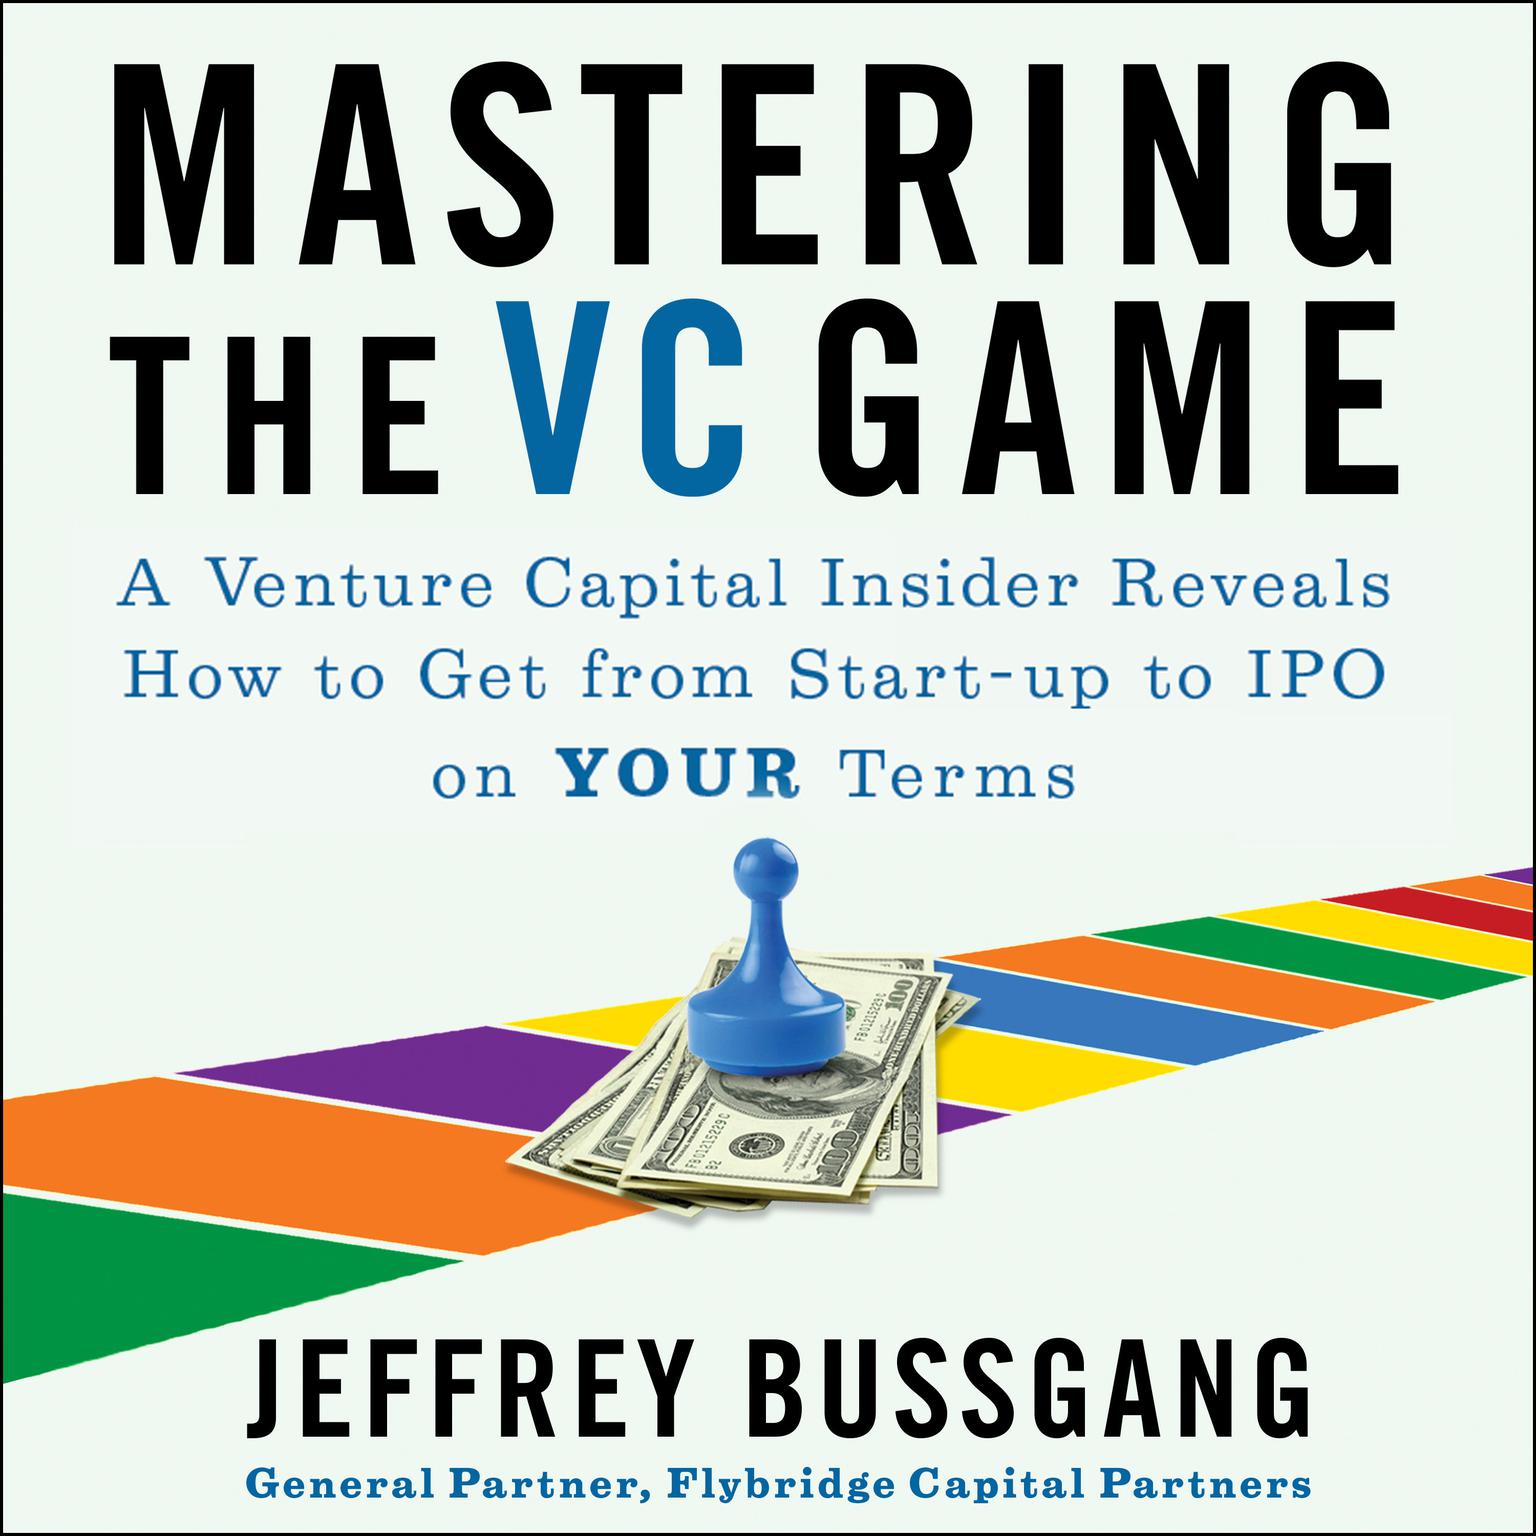 Mastering the VC Game: A Venture Capital Insider Reveals How to Get from Start-up to IPO on Your Terms Audiobook, by Jeffrey Bussgang